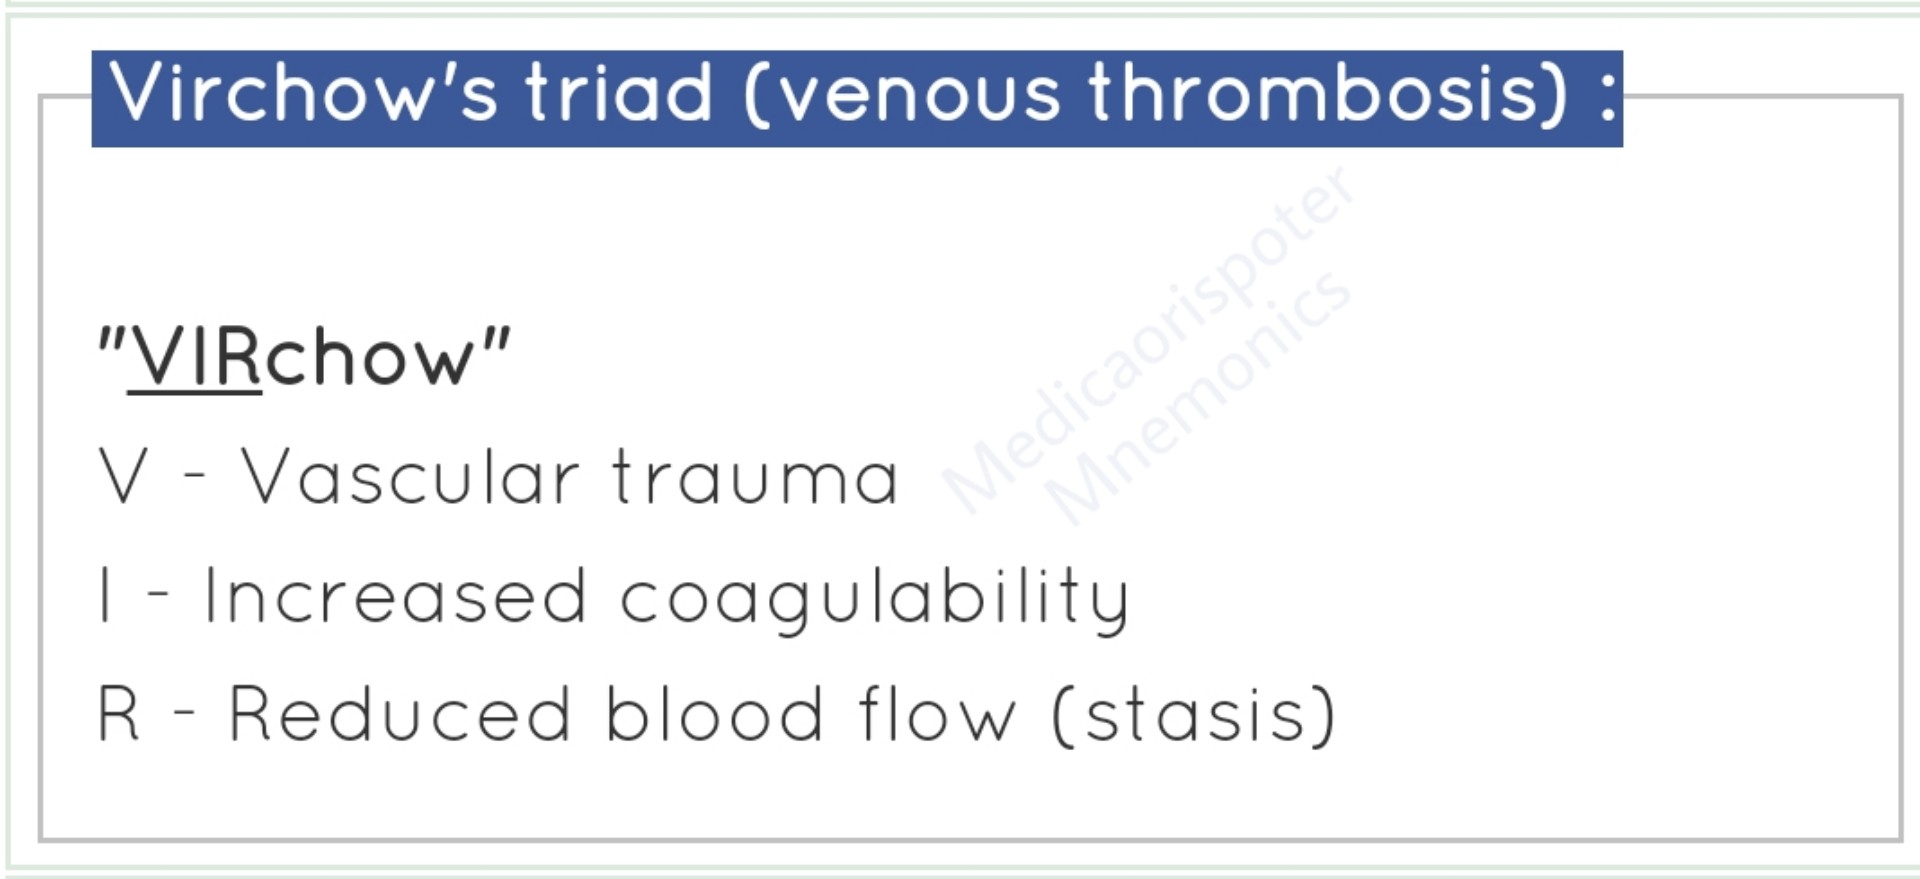 Virchows Triad Venous Thrombosis